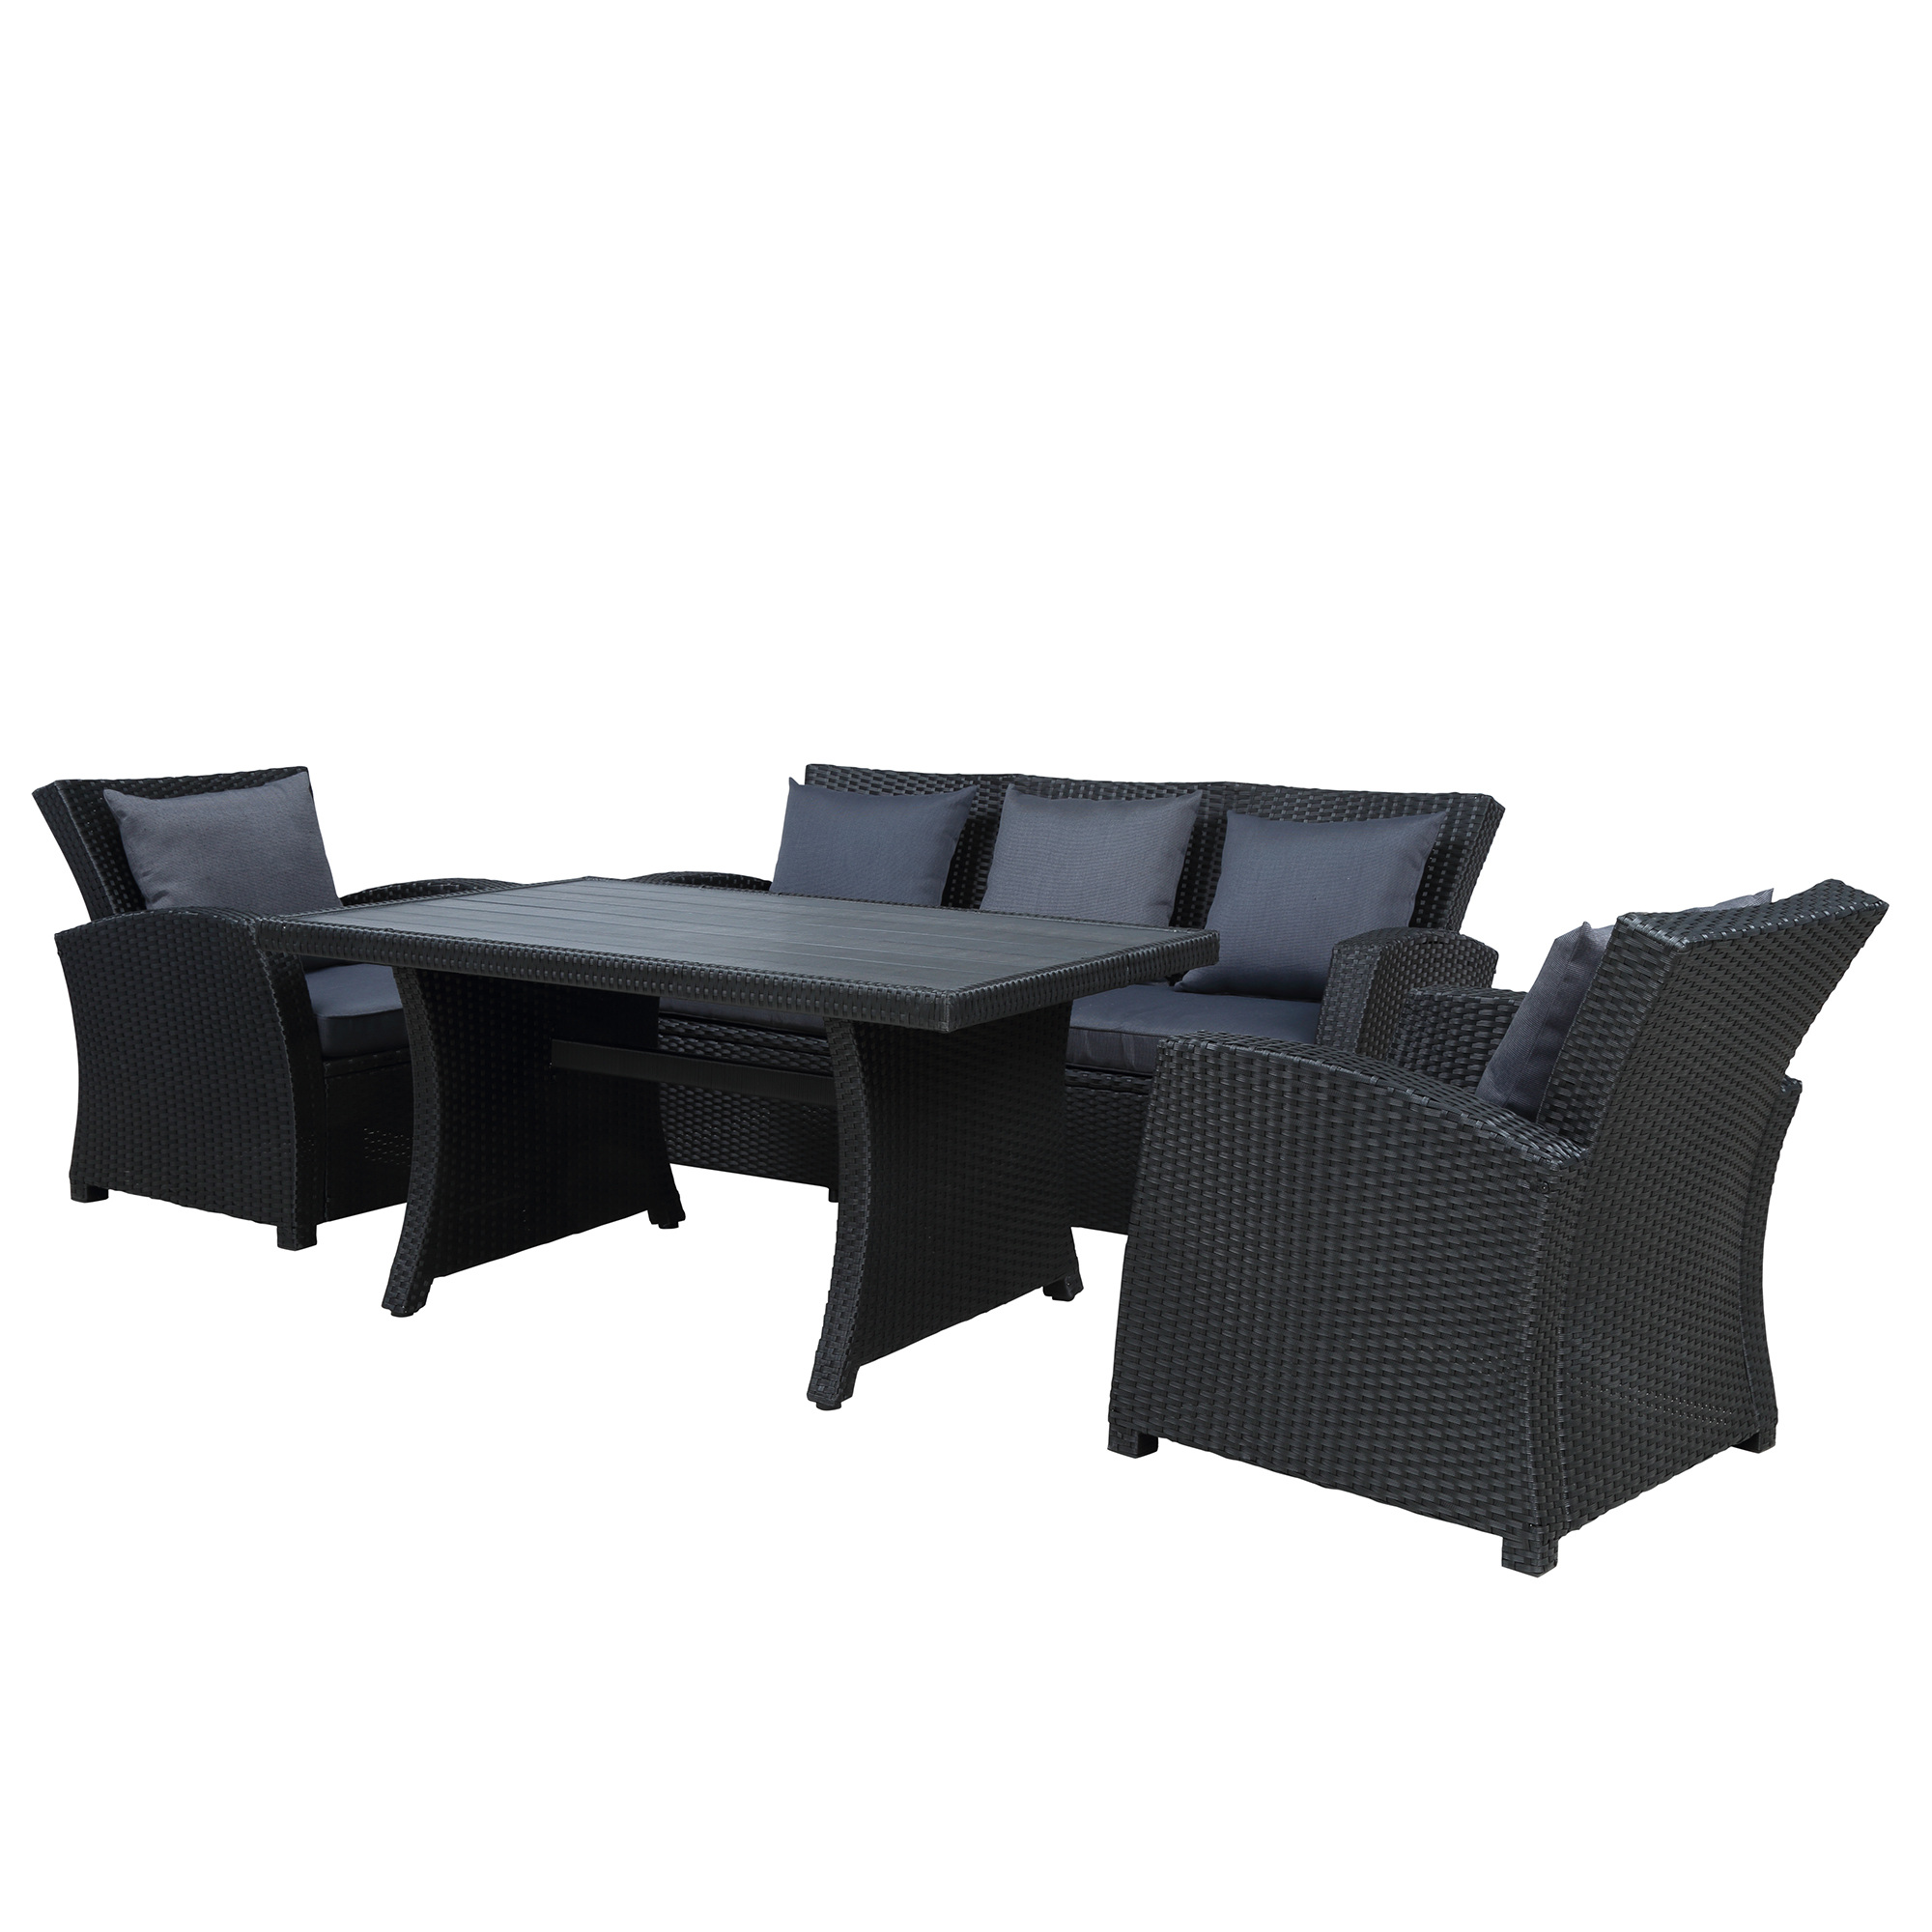 4 Piece Outdoor Patio Furniture Set, 5 Seat Sofa Wicker Chair, Glass Table, All-Weather PE Rattan Patio Conversation Furniture Set for Backyard, Porch, Garden, Poolside - image 3 of 9